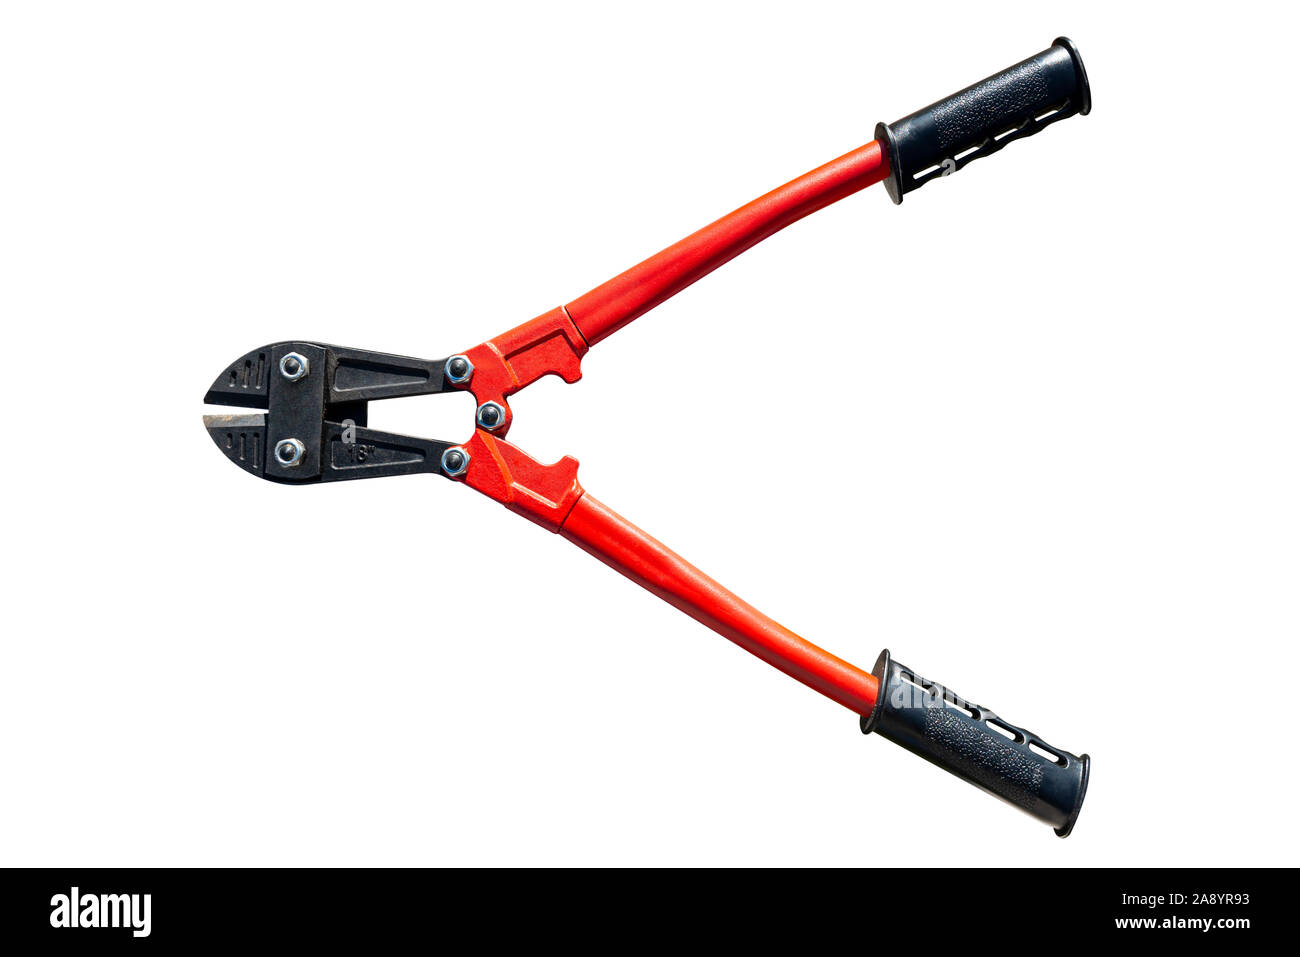 Large 18-inch bolt cutters in red, isolated on a white background with a clipping path. Stock Photo